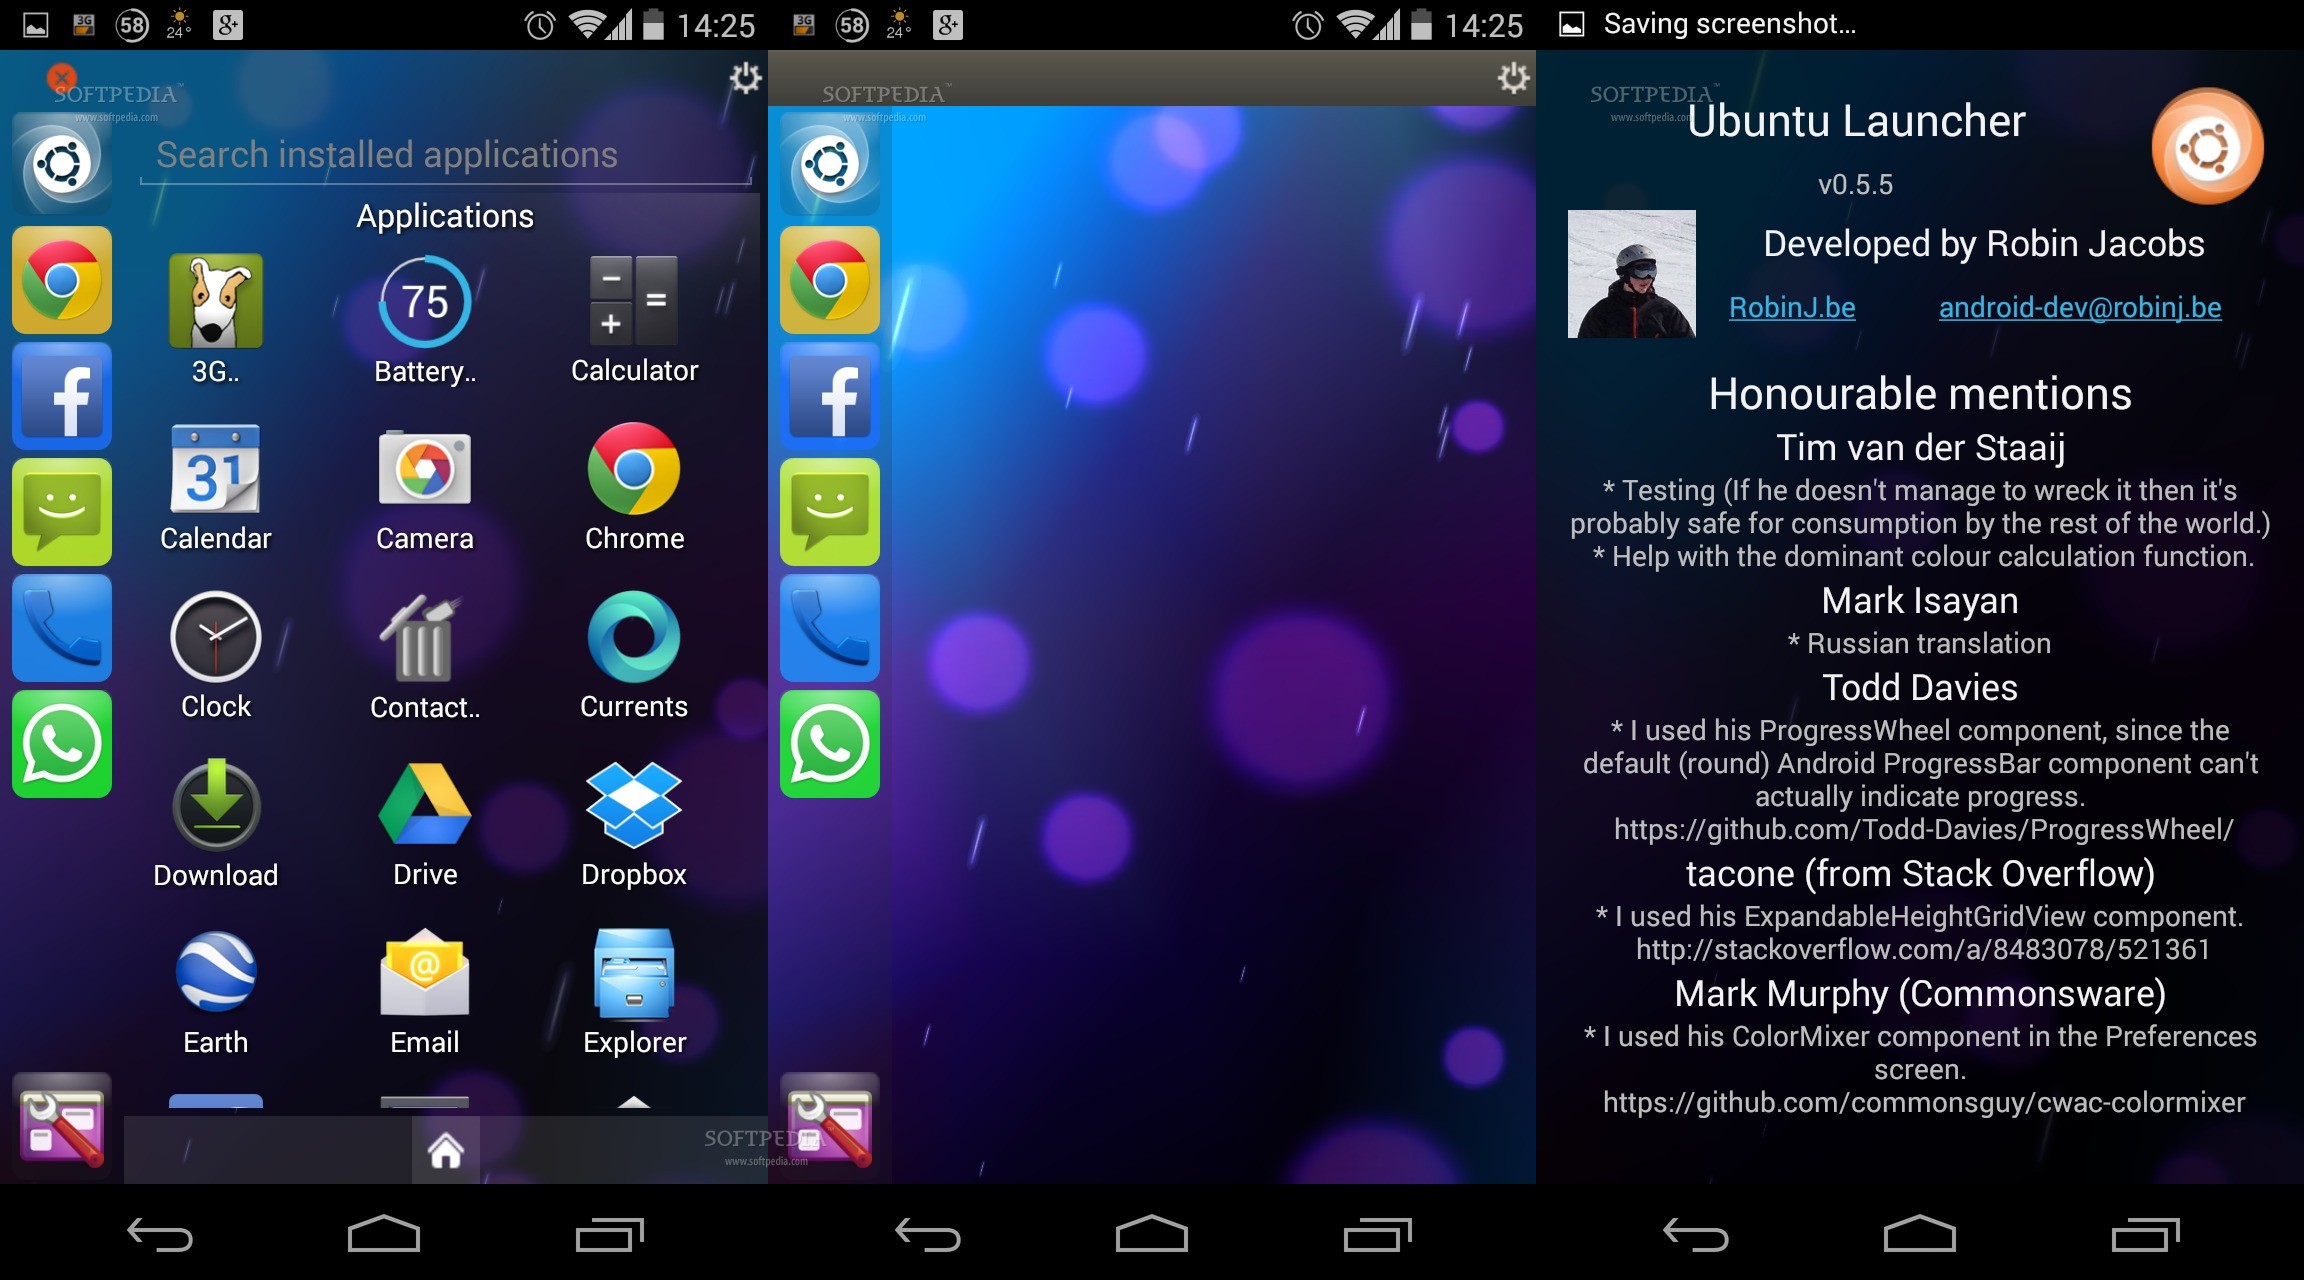 Ubuntu Launcher 0 5 5 for Android Will Transform Your Phone in Ubuntu Gallery 456932 2